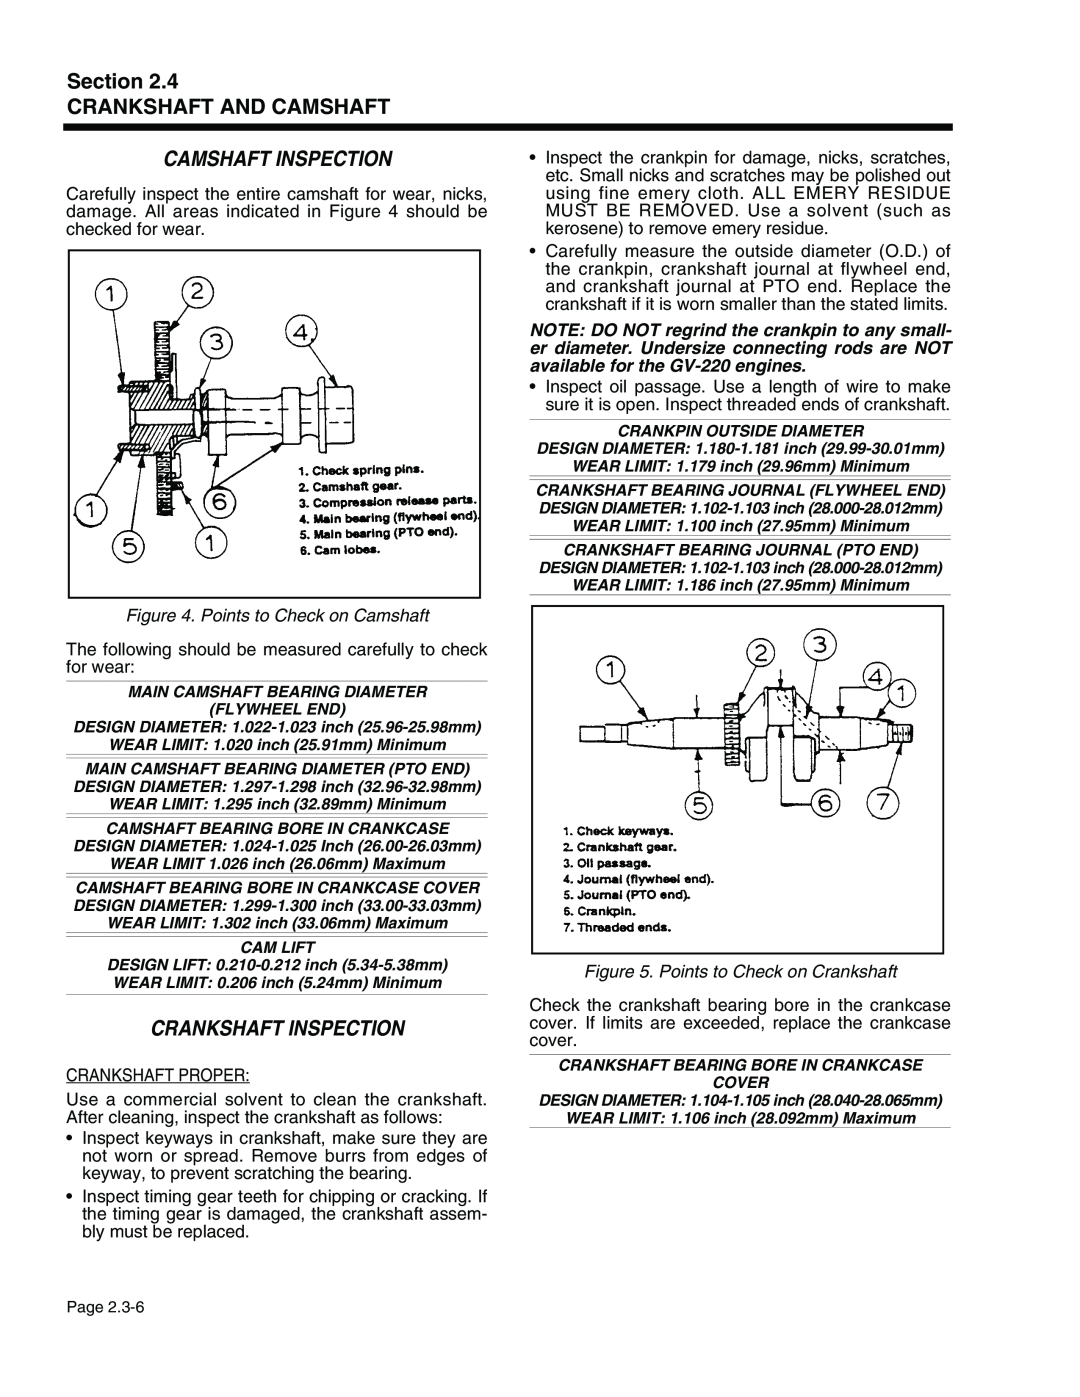 Generac Power Systems 940-2, 941-2 service manual Camshaft Inspection, Crankshaft Inspection, Points to Check on Camshaft 